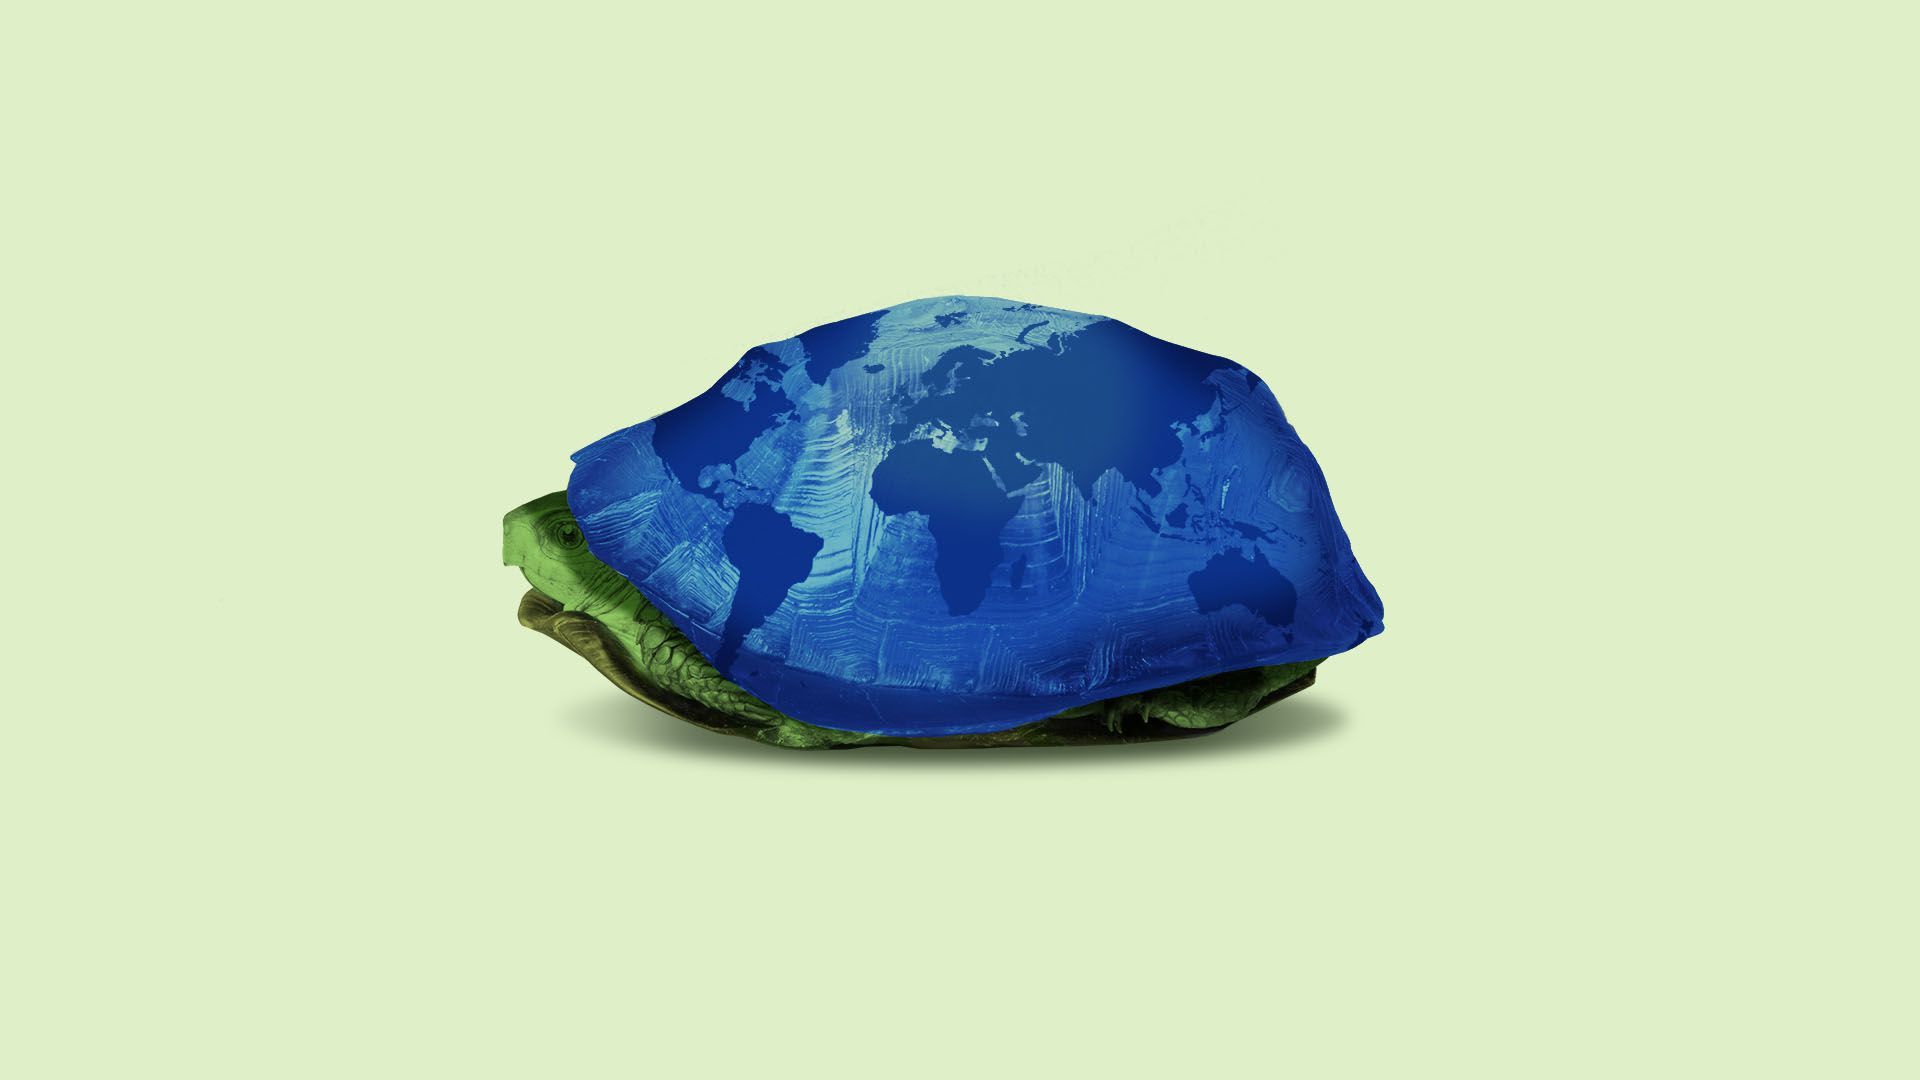 Illustration of world in the form of a retreating turtle shell